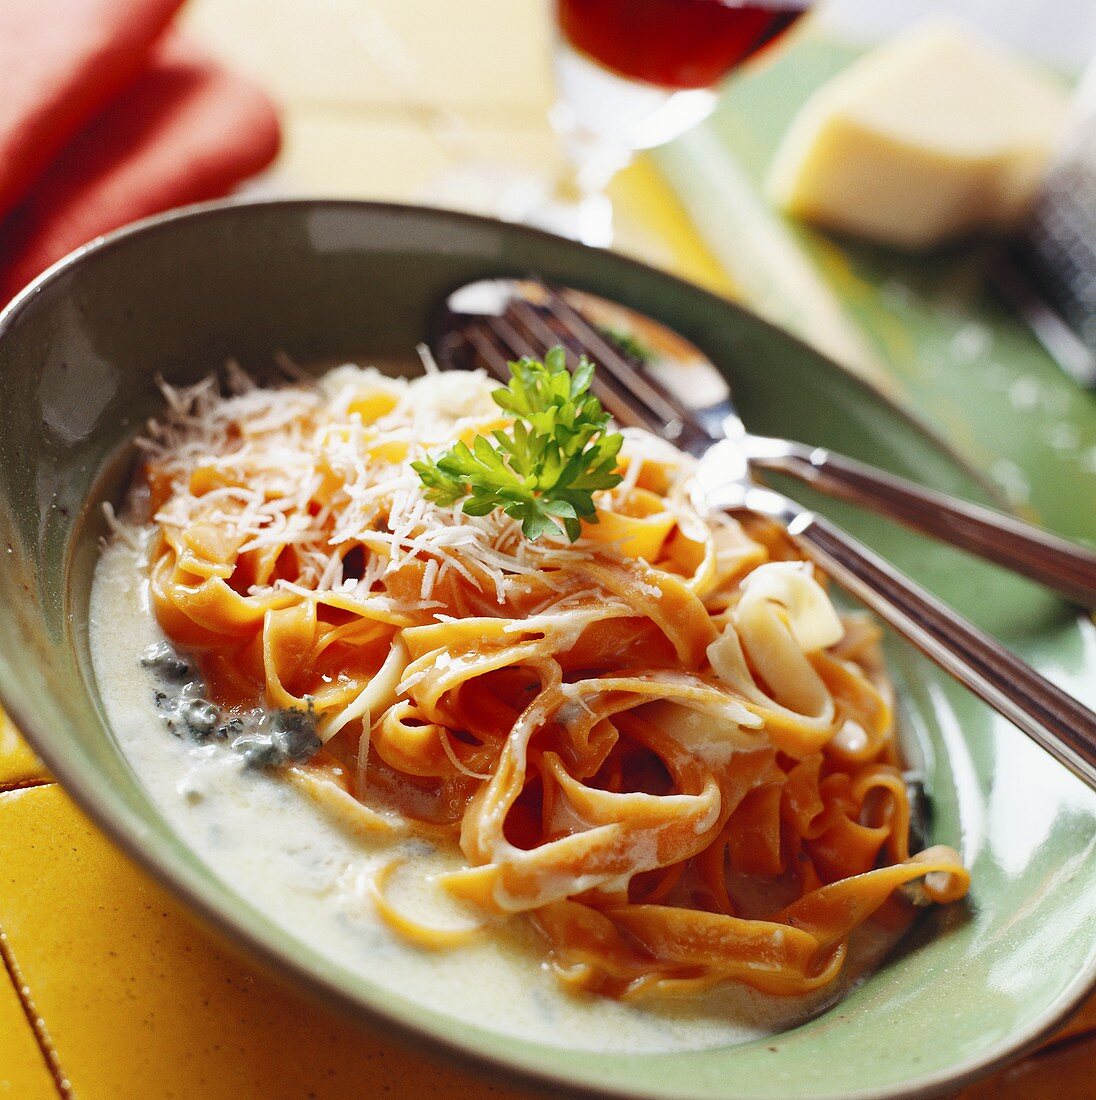 Tomato tagliatelle in cheese sauce, sprinkled with Parmesan